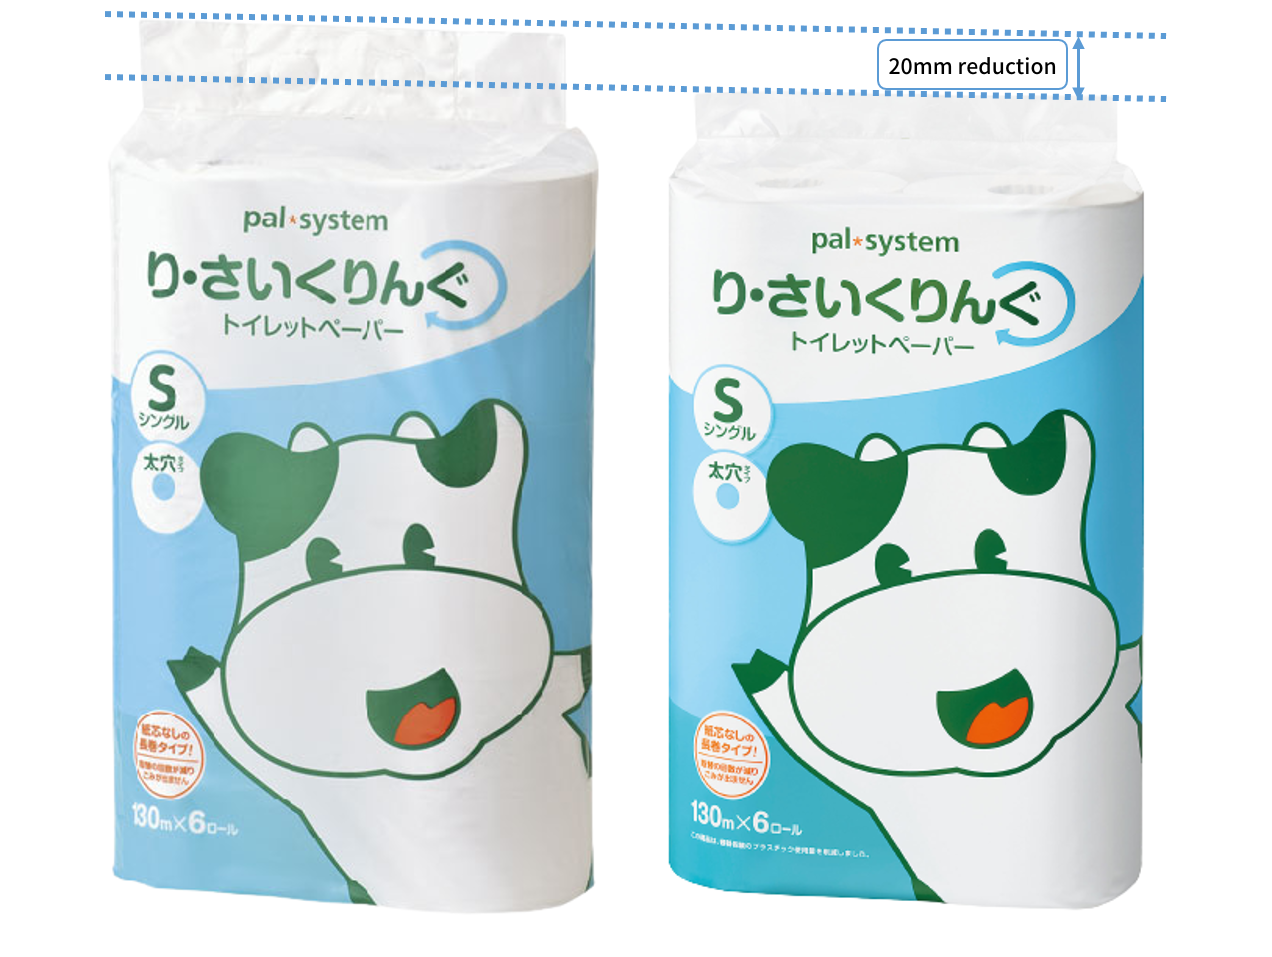 The Palsystem Consumers' Co-operative Union starts a full-scale reduction of plastic packaging materials for toilet paper and tissues